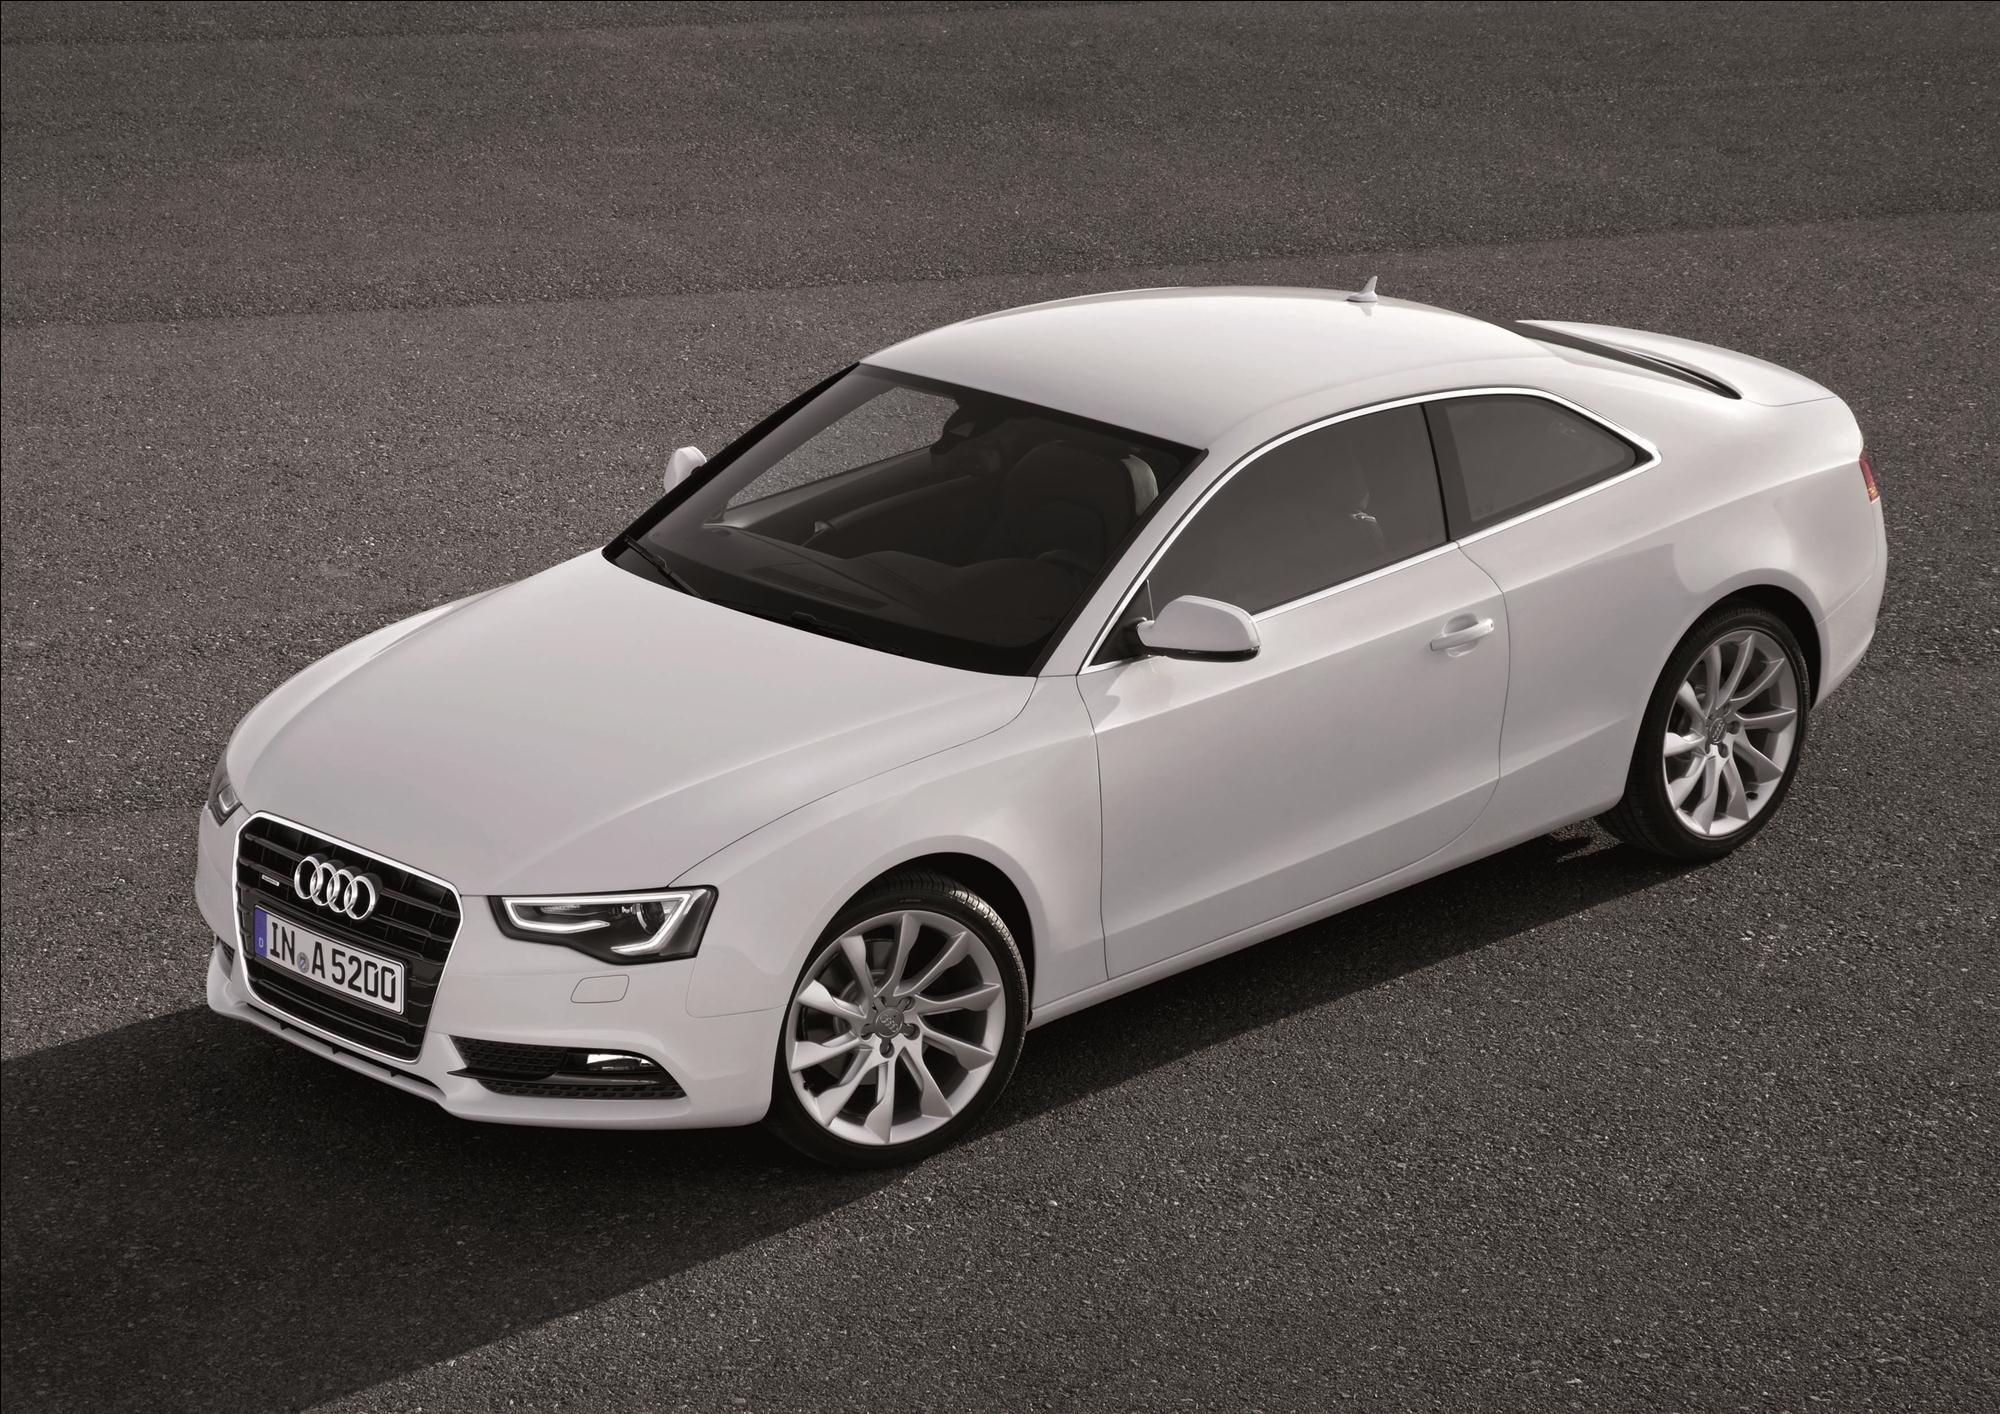 2012 Audi A5, S5 Preview